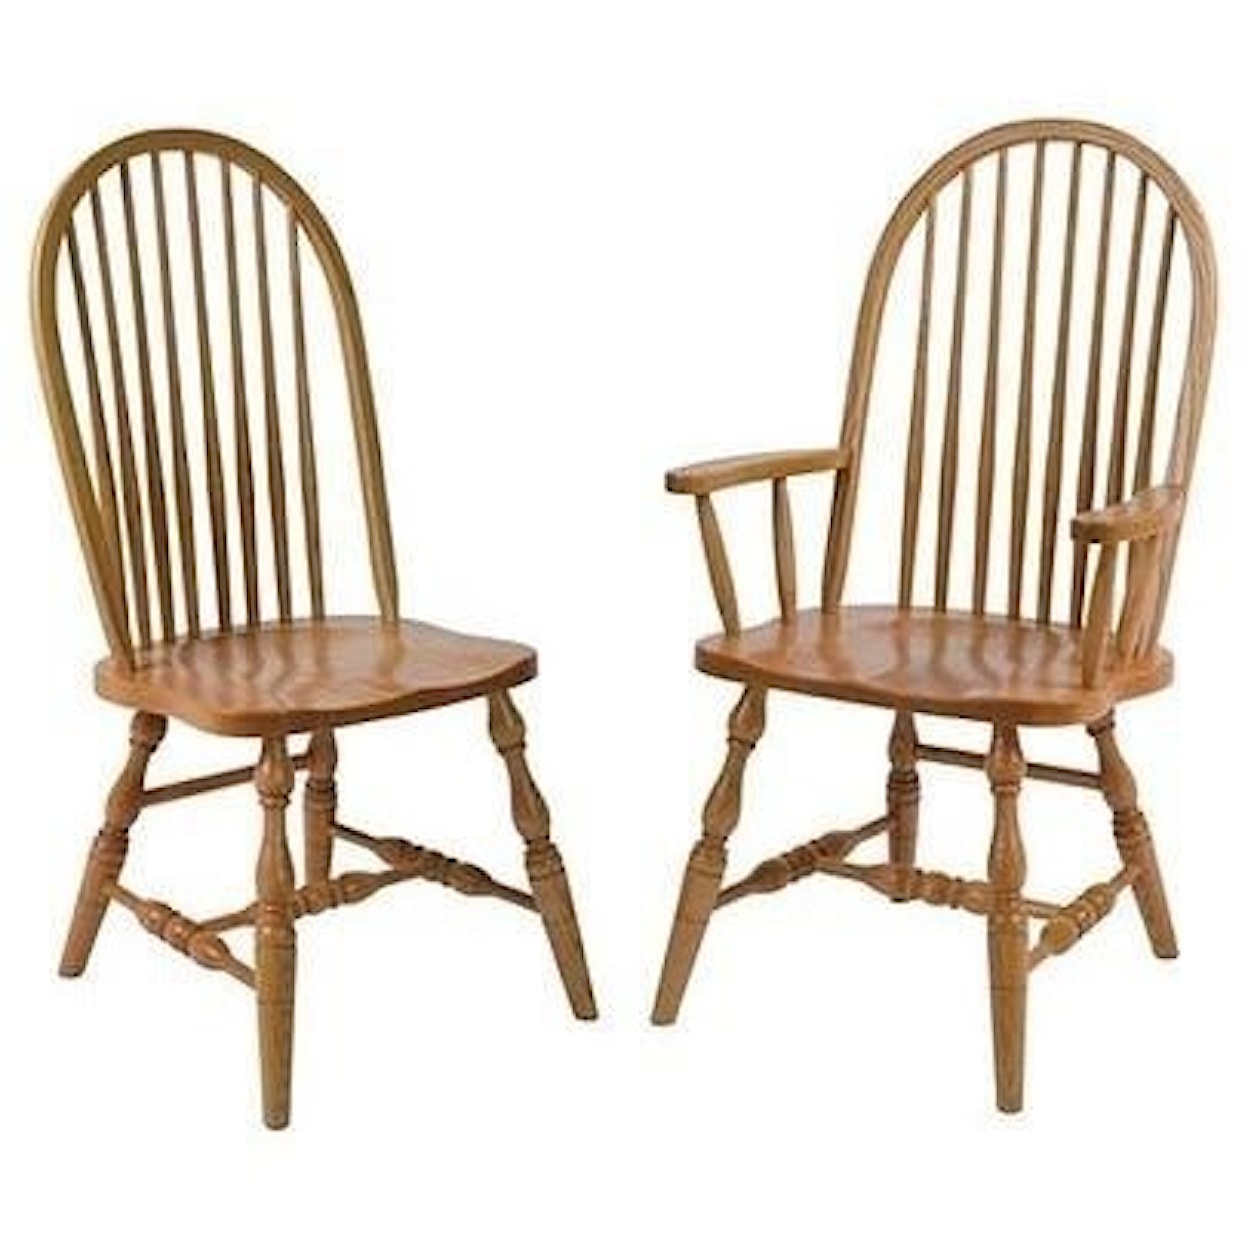 Horseshoe Bend Bent Feather Solid Wood Deluxe High Back Arm Chair